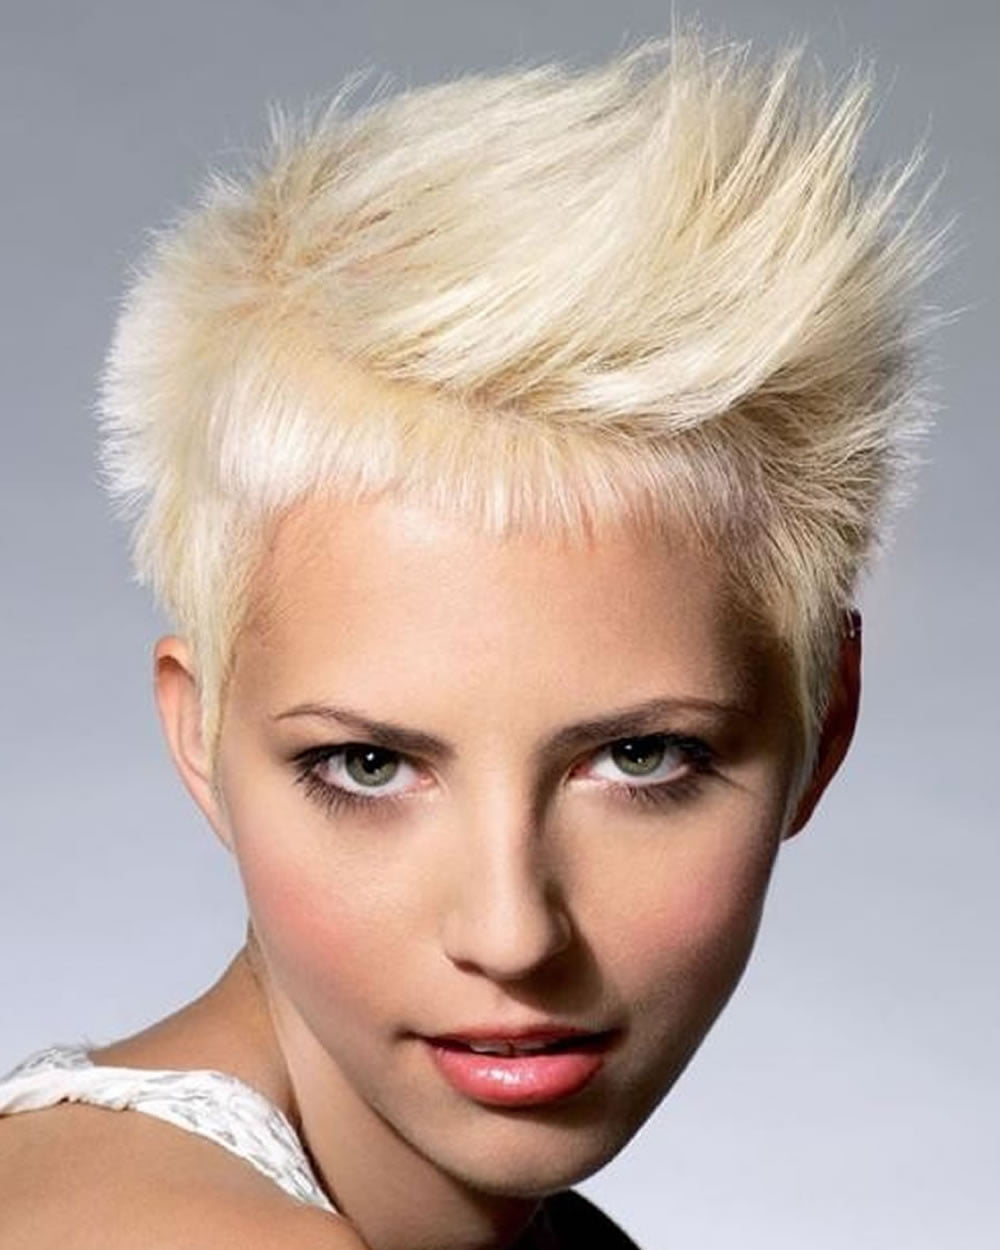 25 Trend Ultra Short Hairstyle Ideas & Very Short Pixie Hair Cut Images